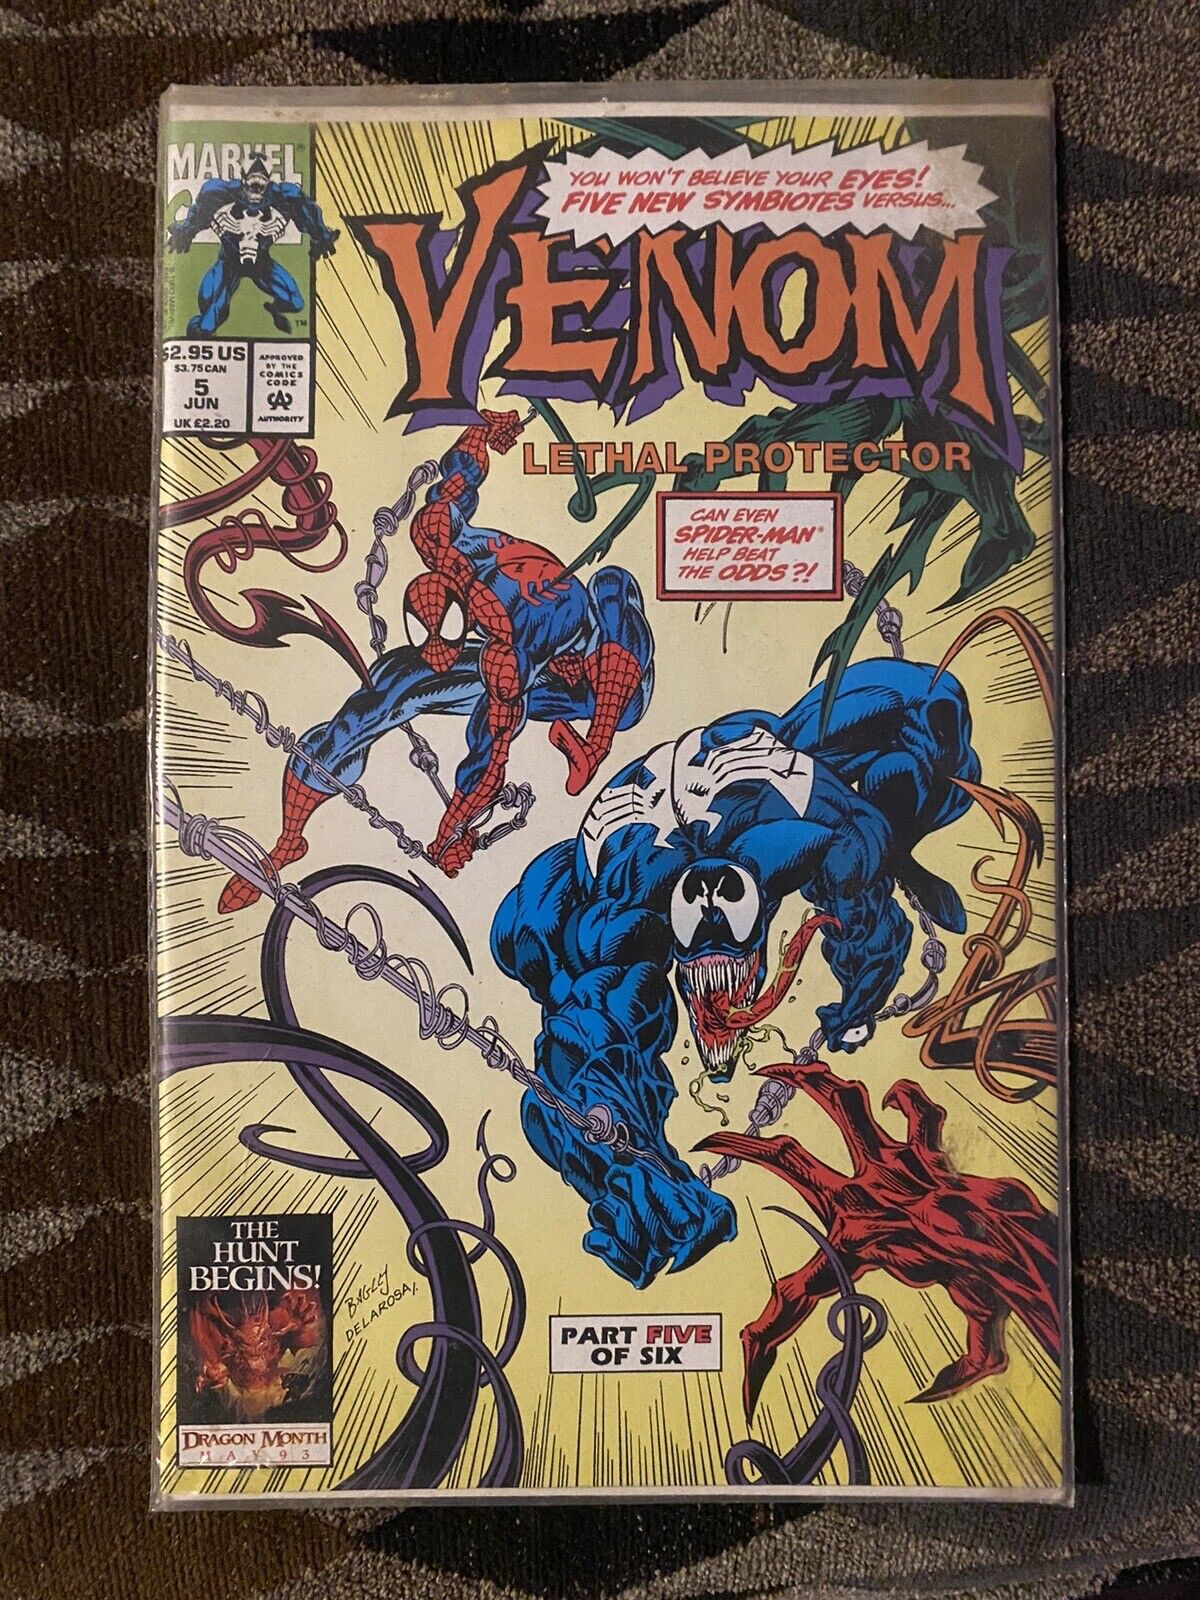 Venom Lethal Protector #5 VF-NM MINT Condition